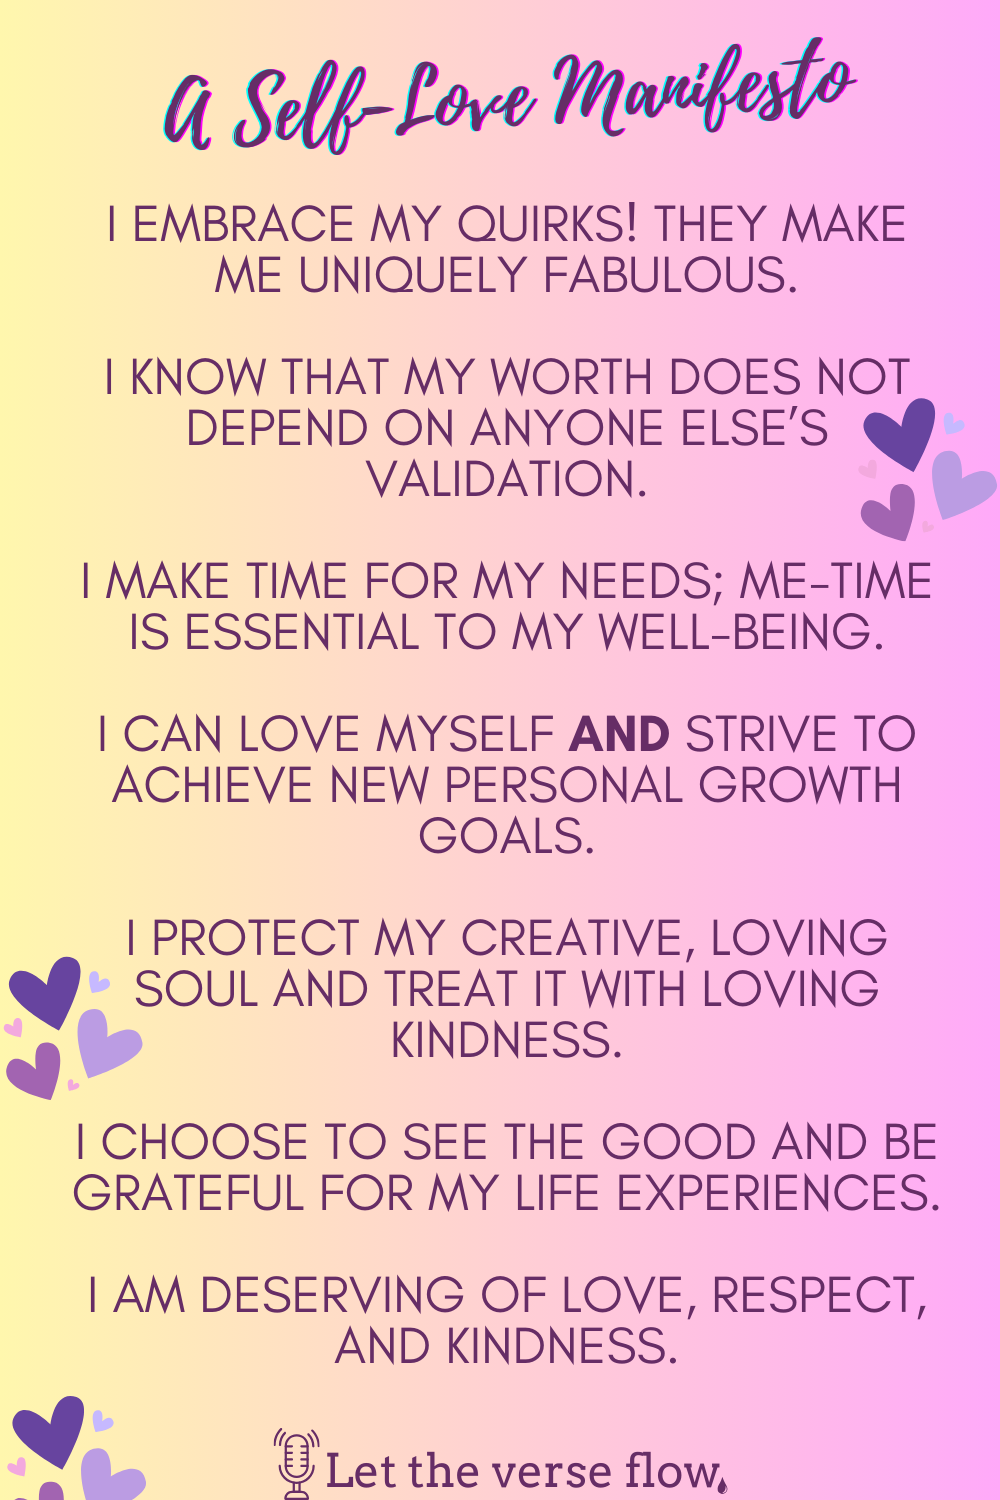 a yellow and pink gradient background with affirmation statements about self-love